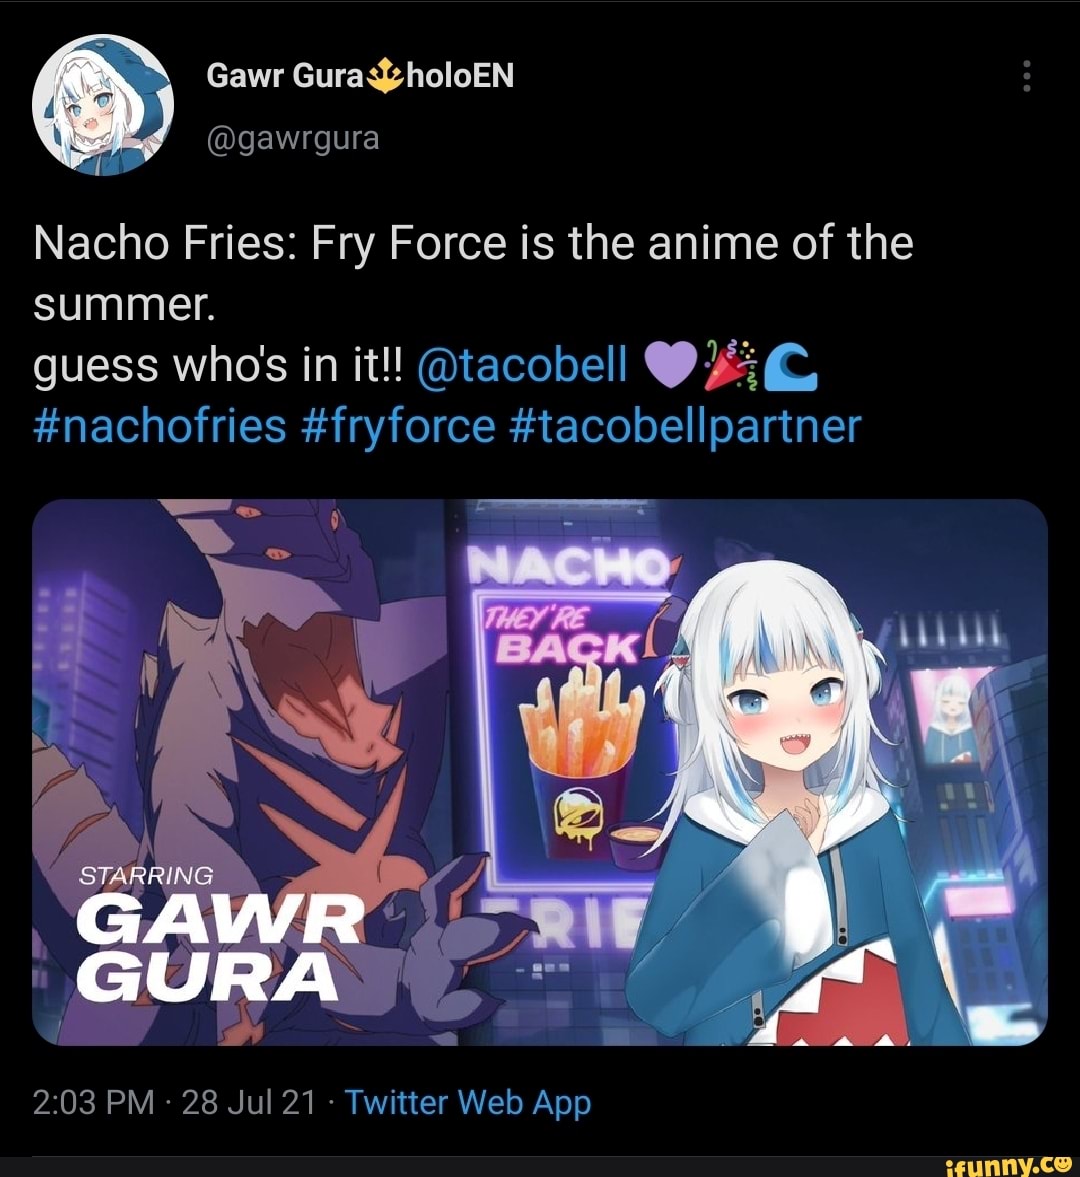 Check Out These Amazing Anime Promoting Tourism Nachos and more   campussg  Campus Magazine